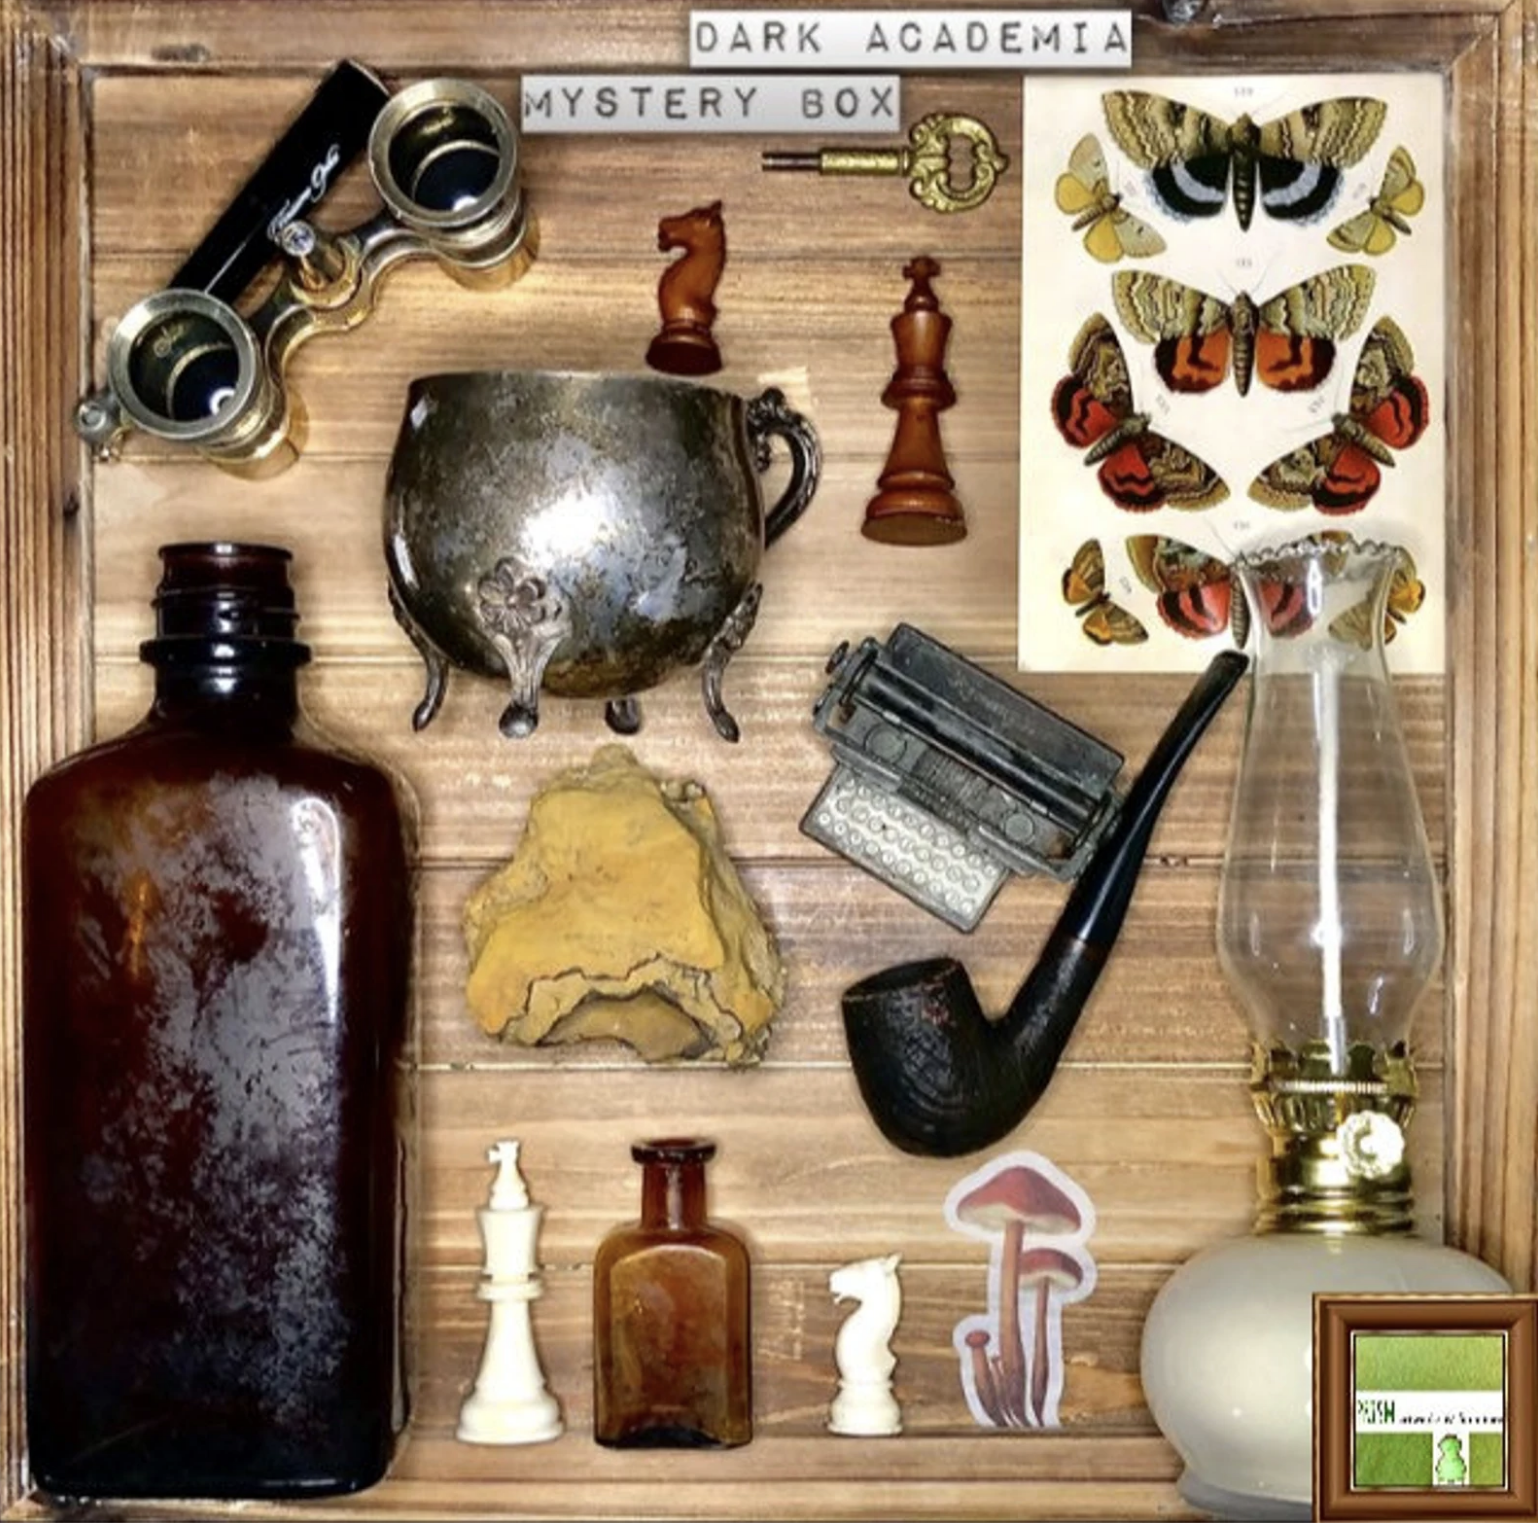 A flay lay of some dark academia knick knacks including chess pieces, a pipe, amber bottles, and more